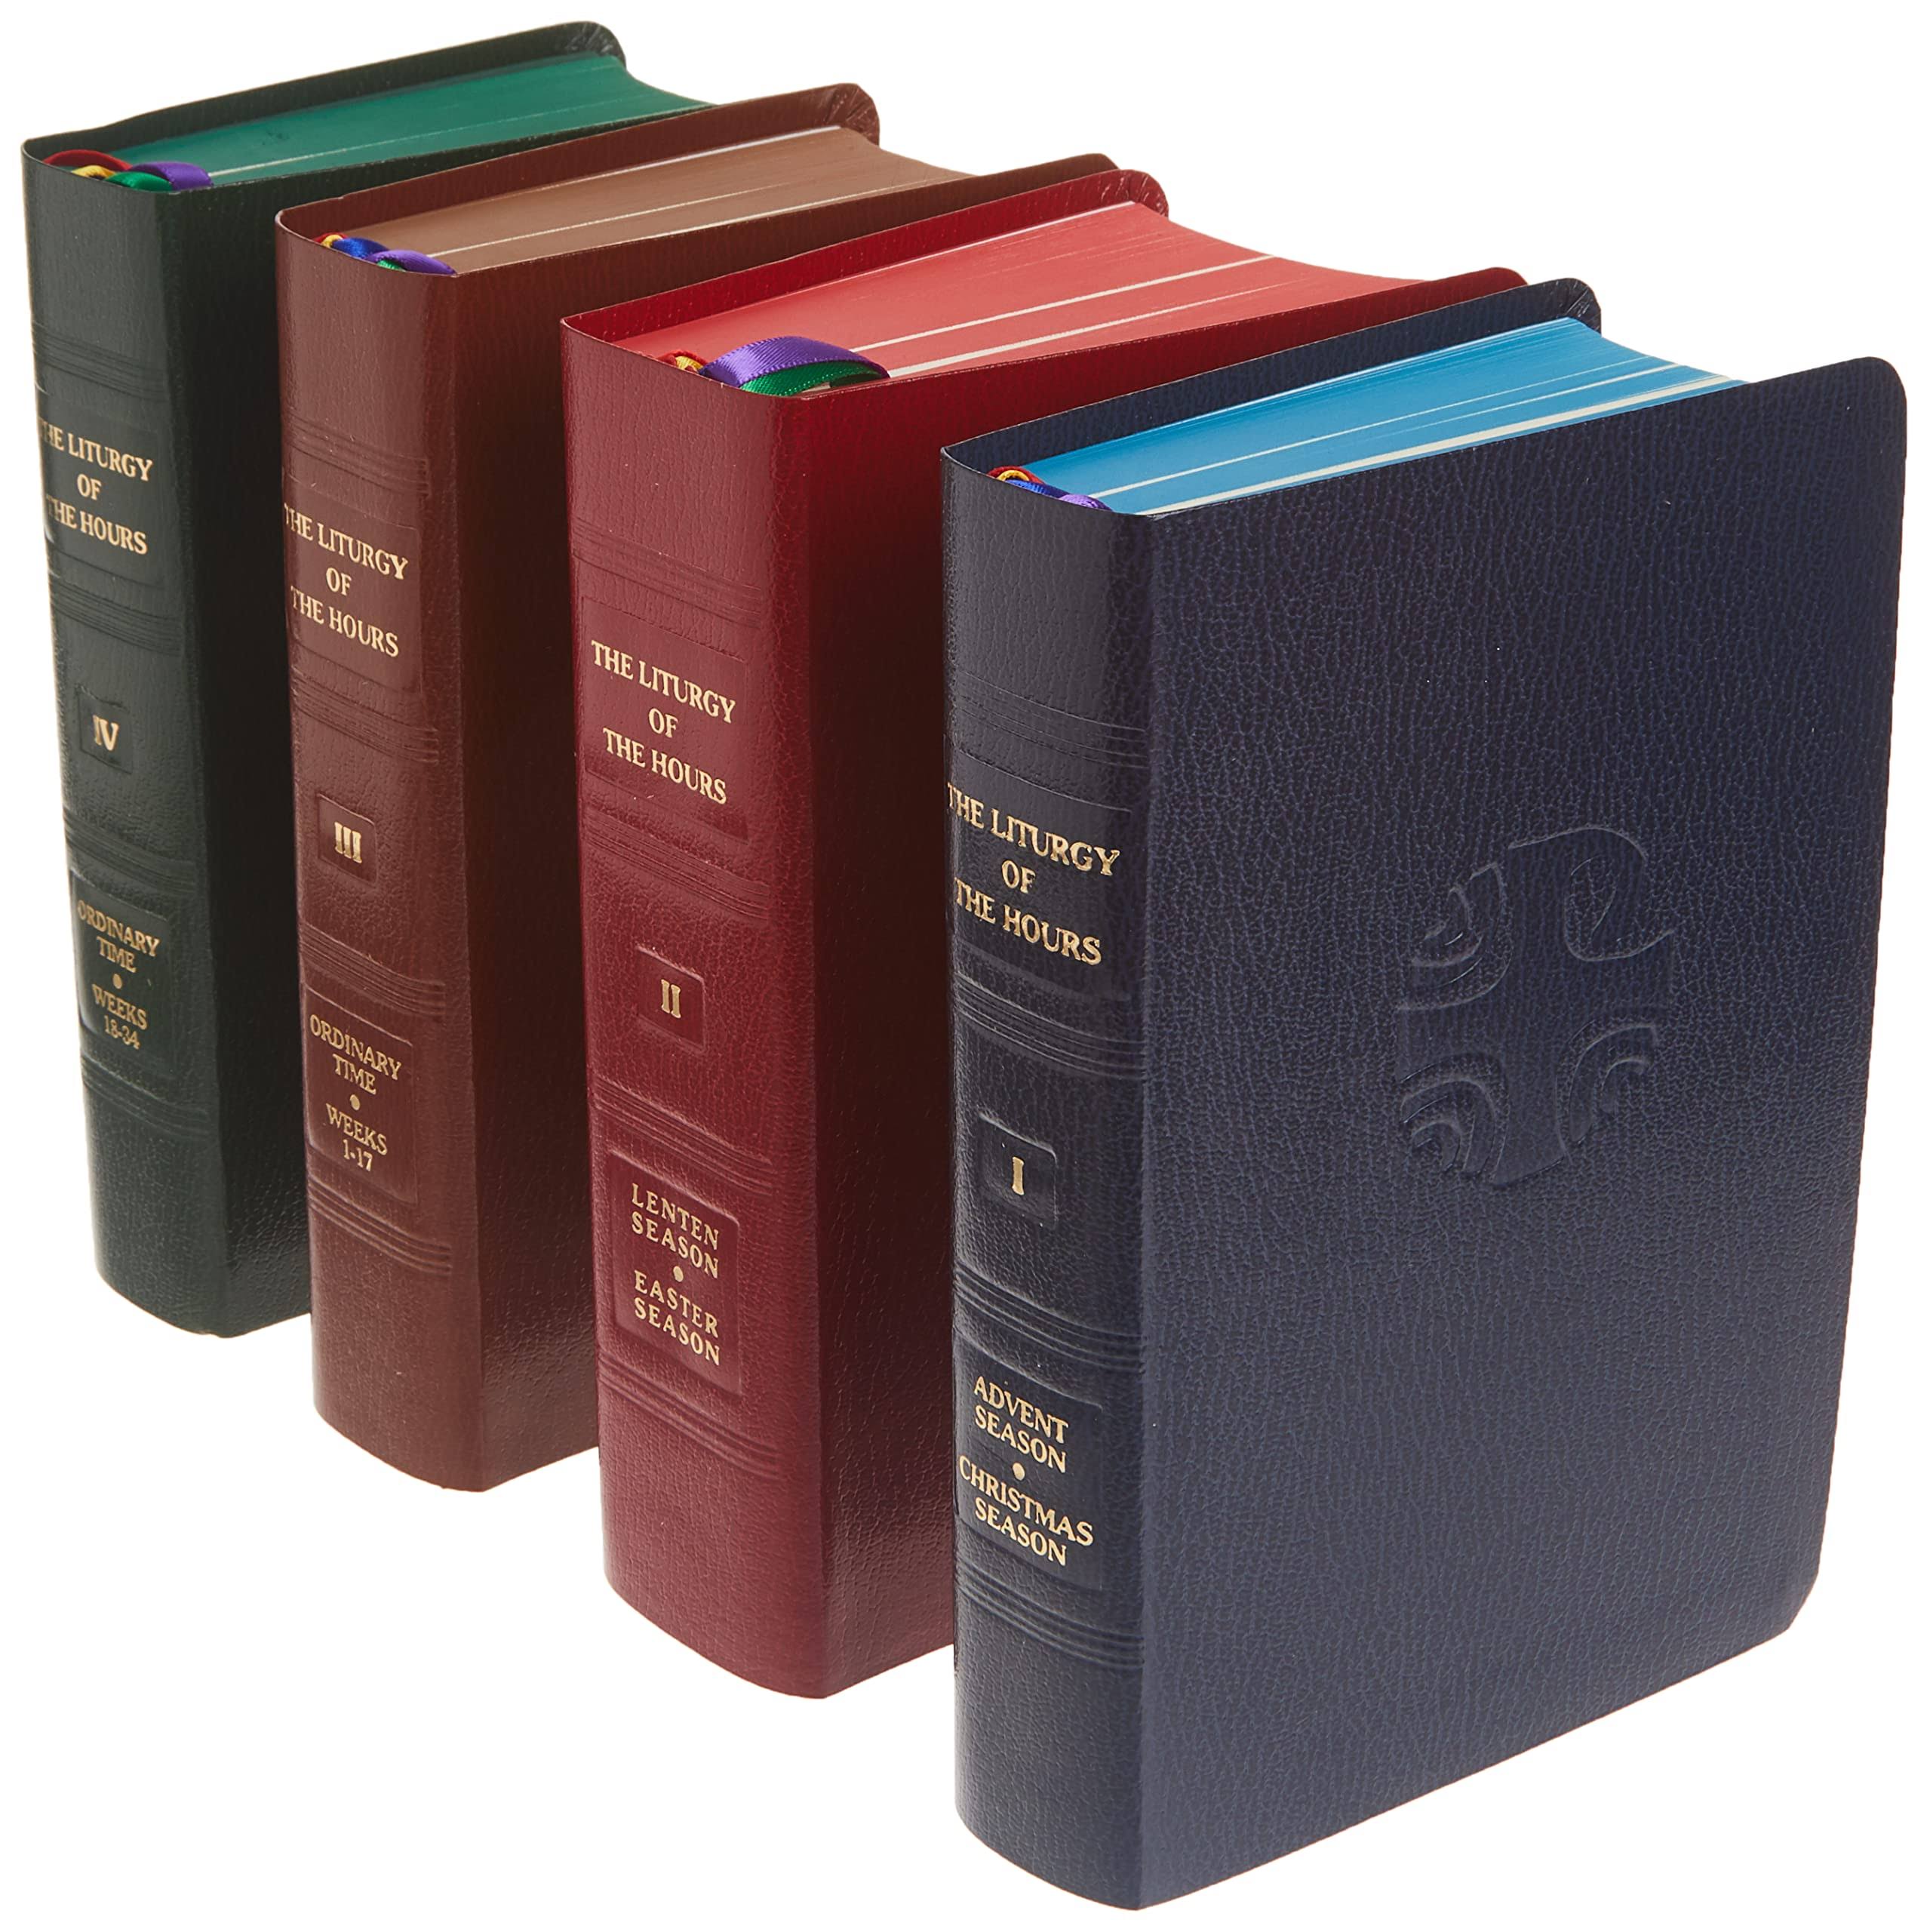 Liturgy of the Hours - 4 Book Set